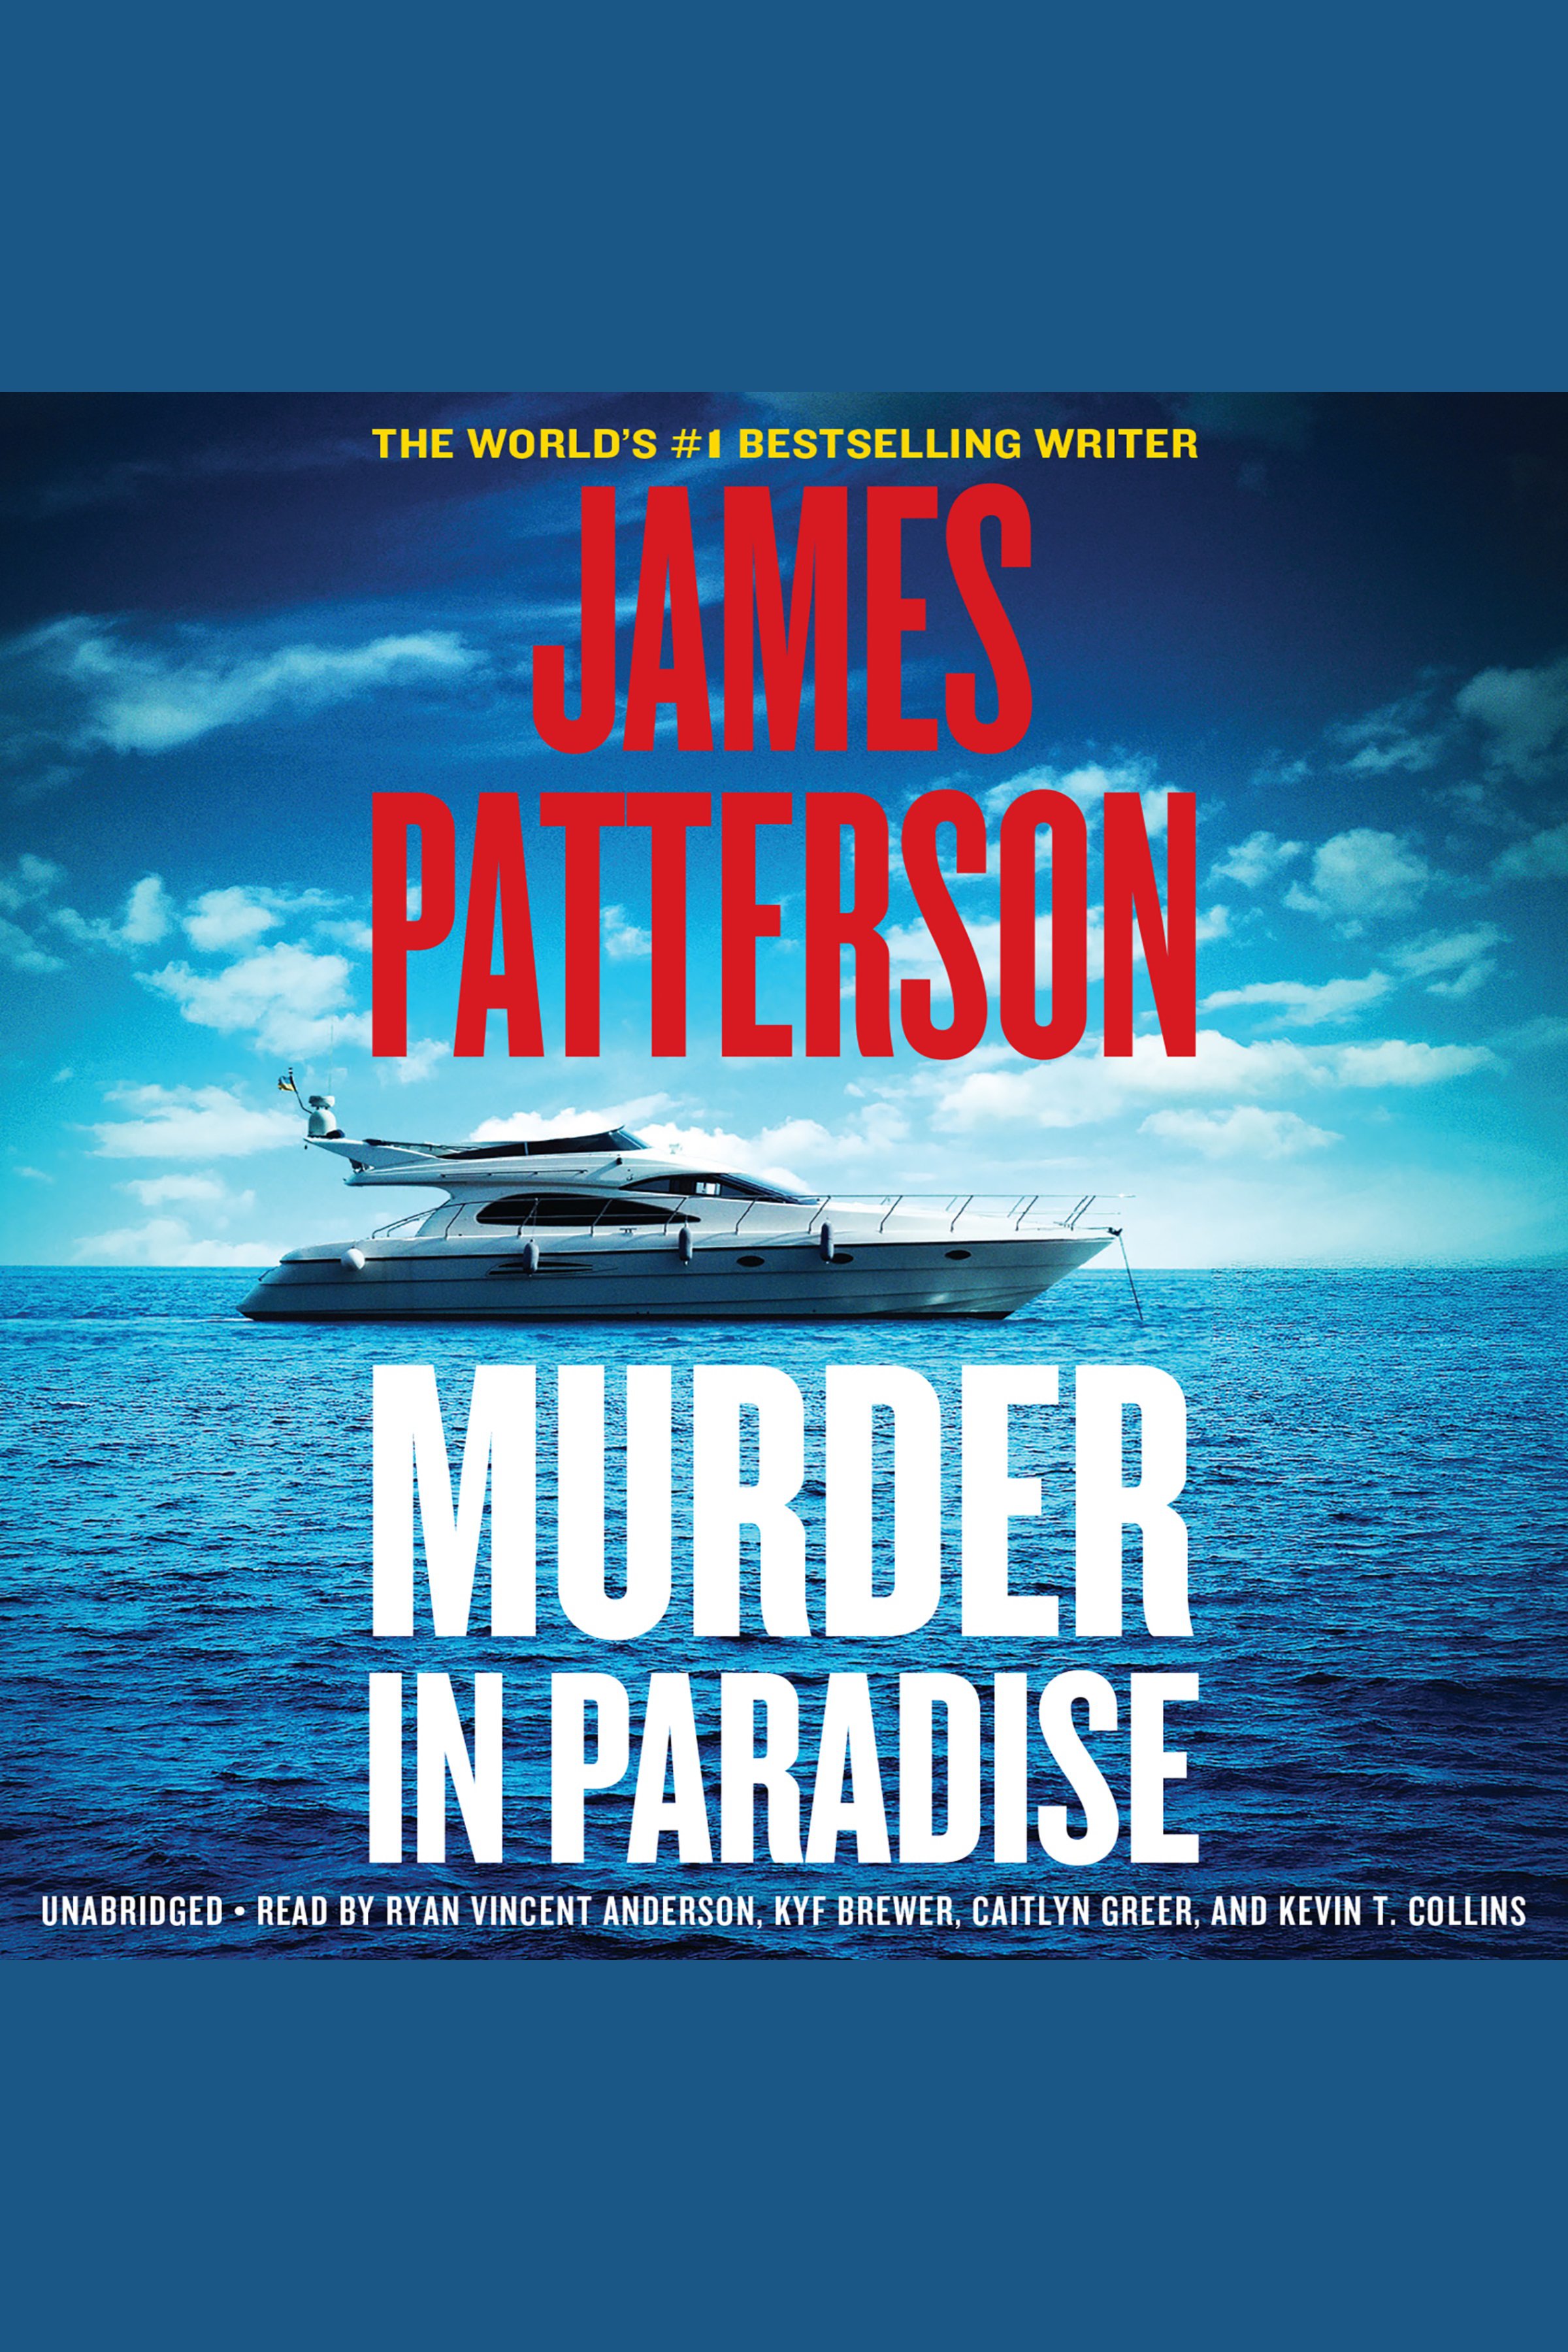 Murder in paradise cover image